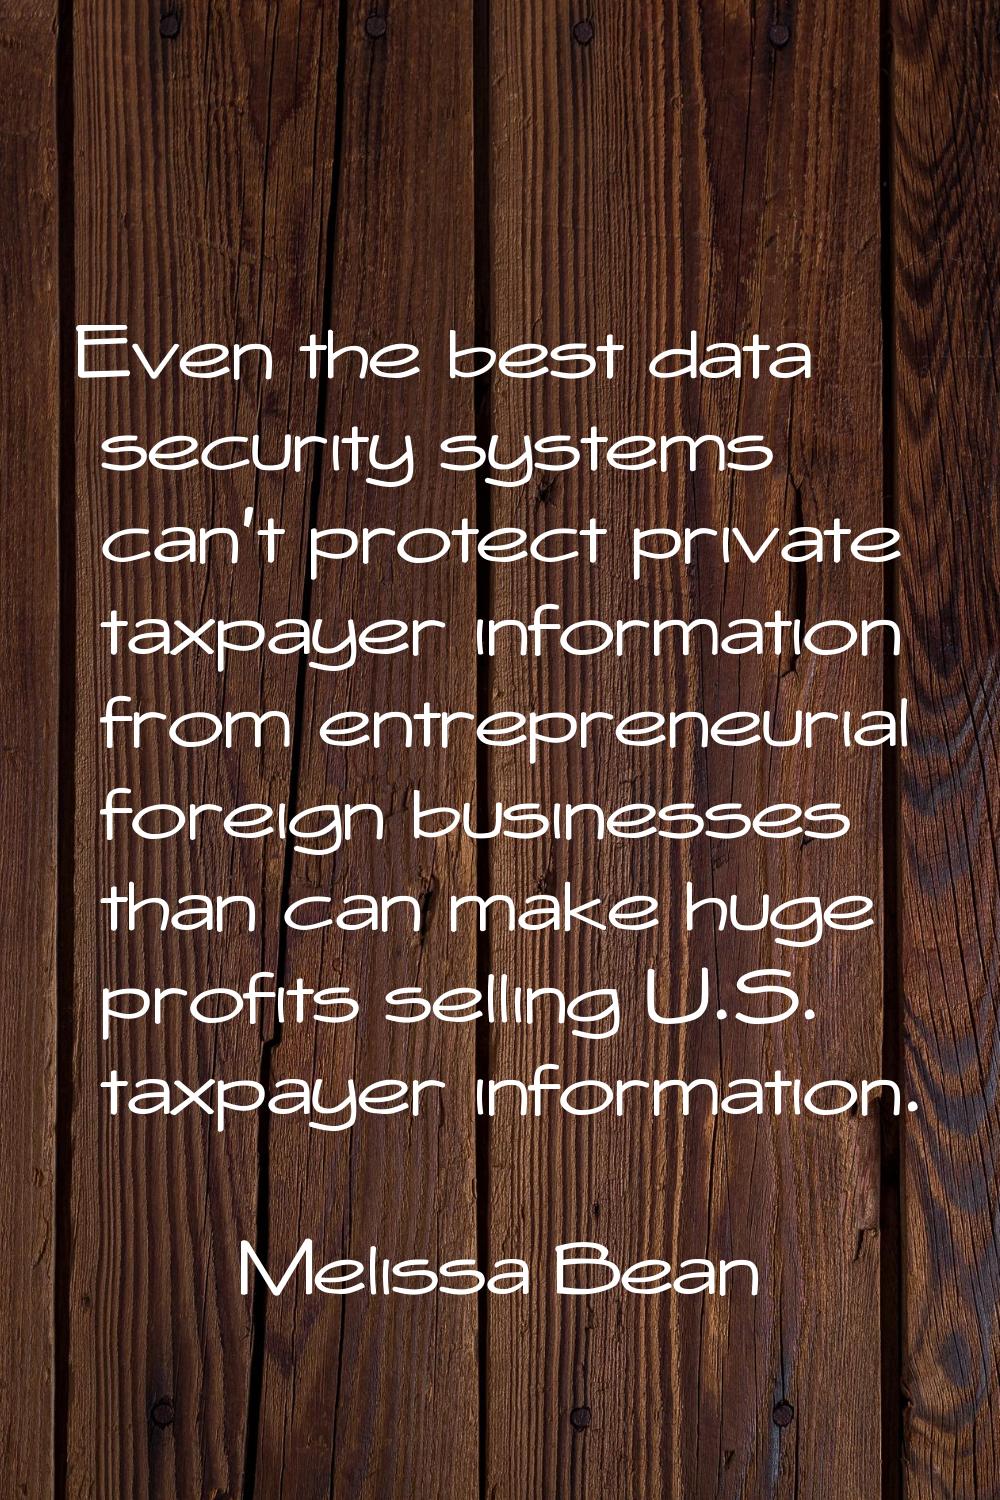 Even the best data security systems can't protect private taxpayer information from entrepreneurial